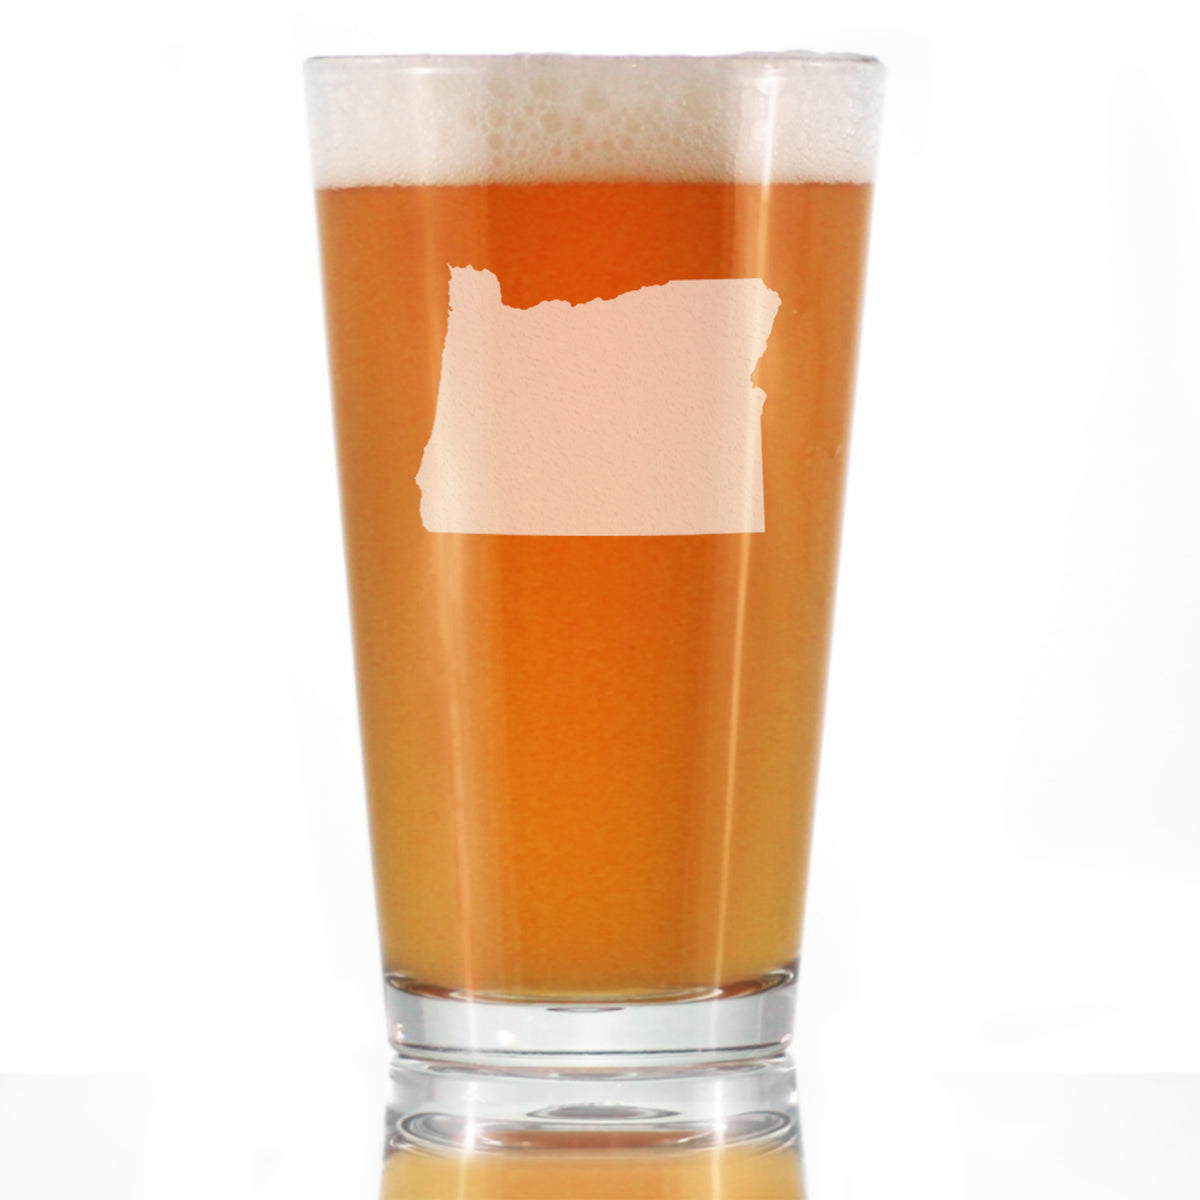 Oregon State Outline Pint Glass for Beer - State Themed Drinking Decor and Gifts for Oregonian Women &amp; Men - 16 Oz Glasses